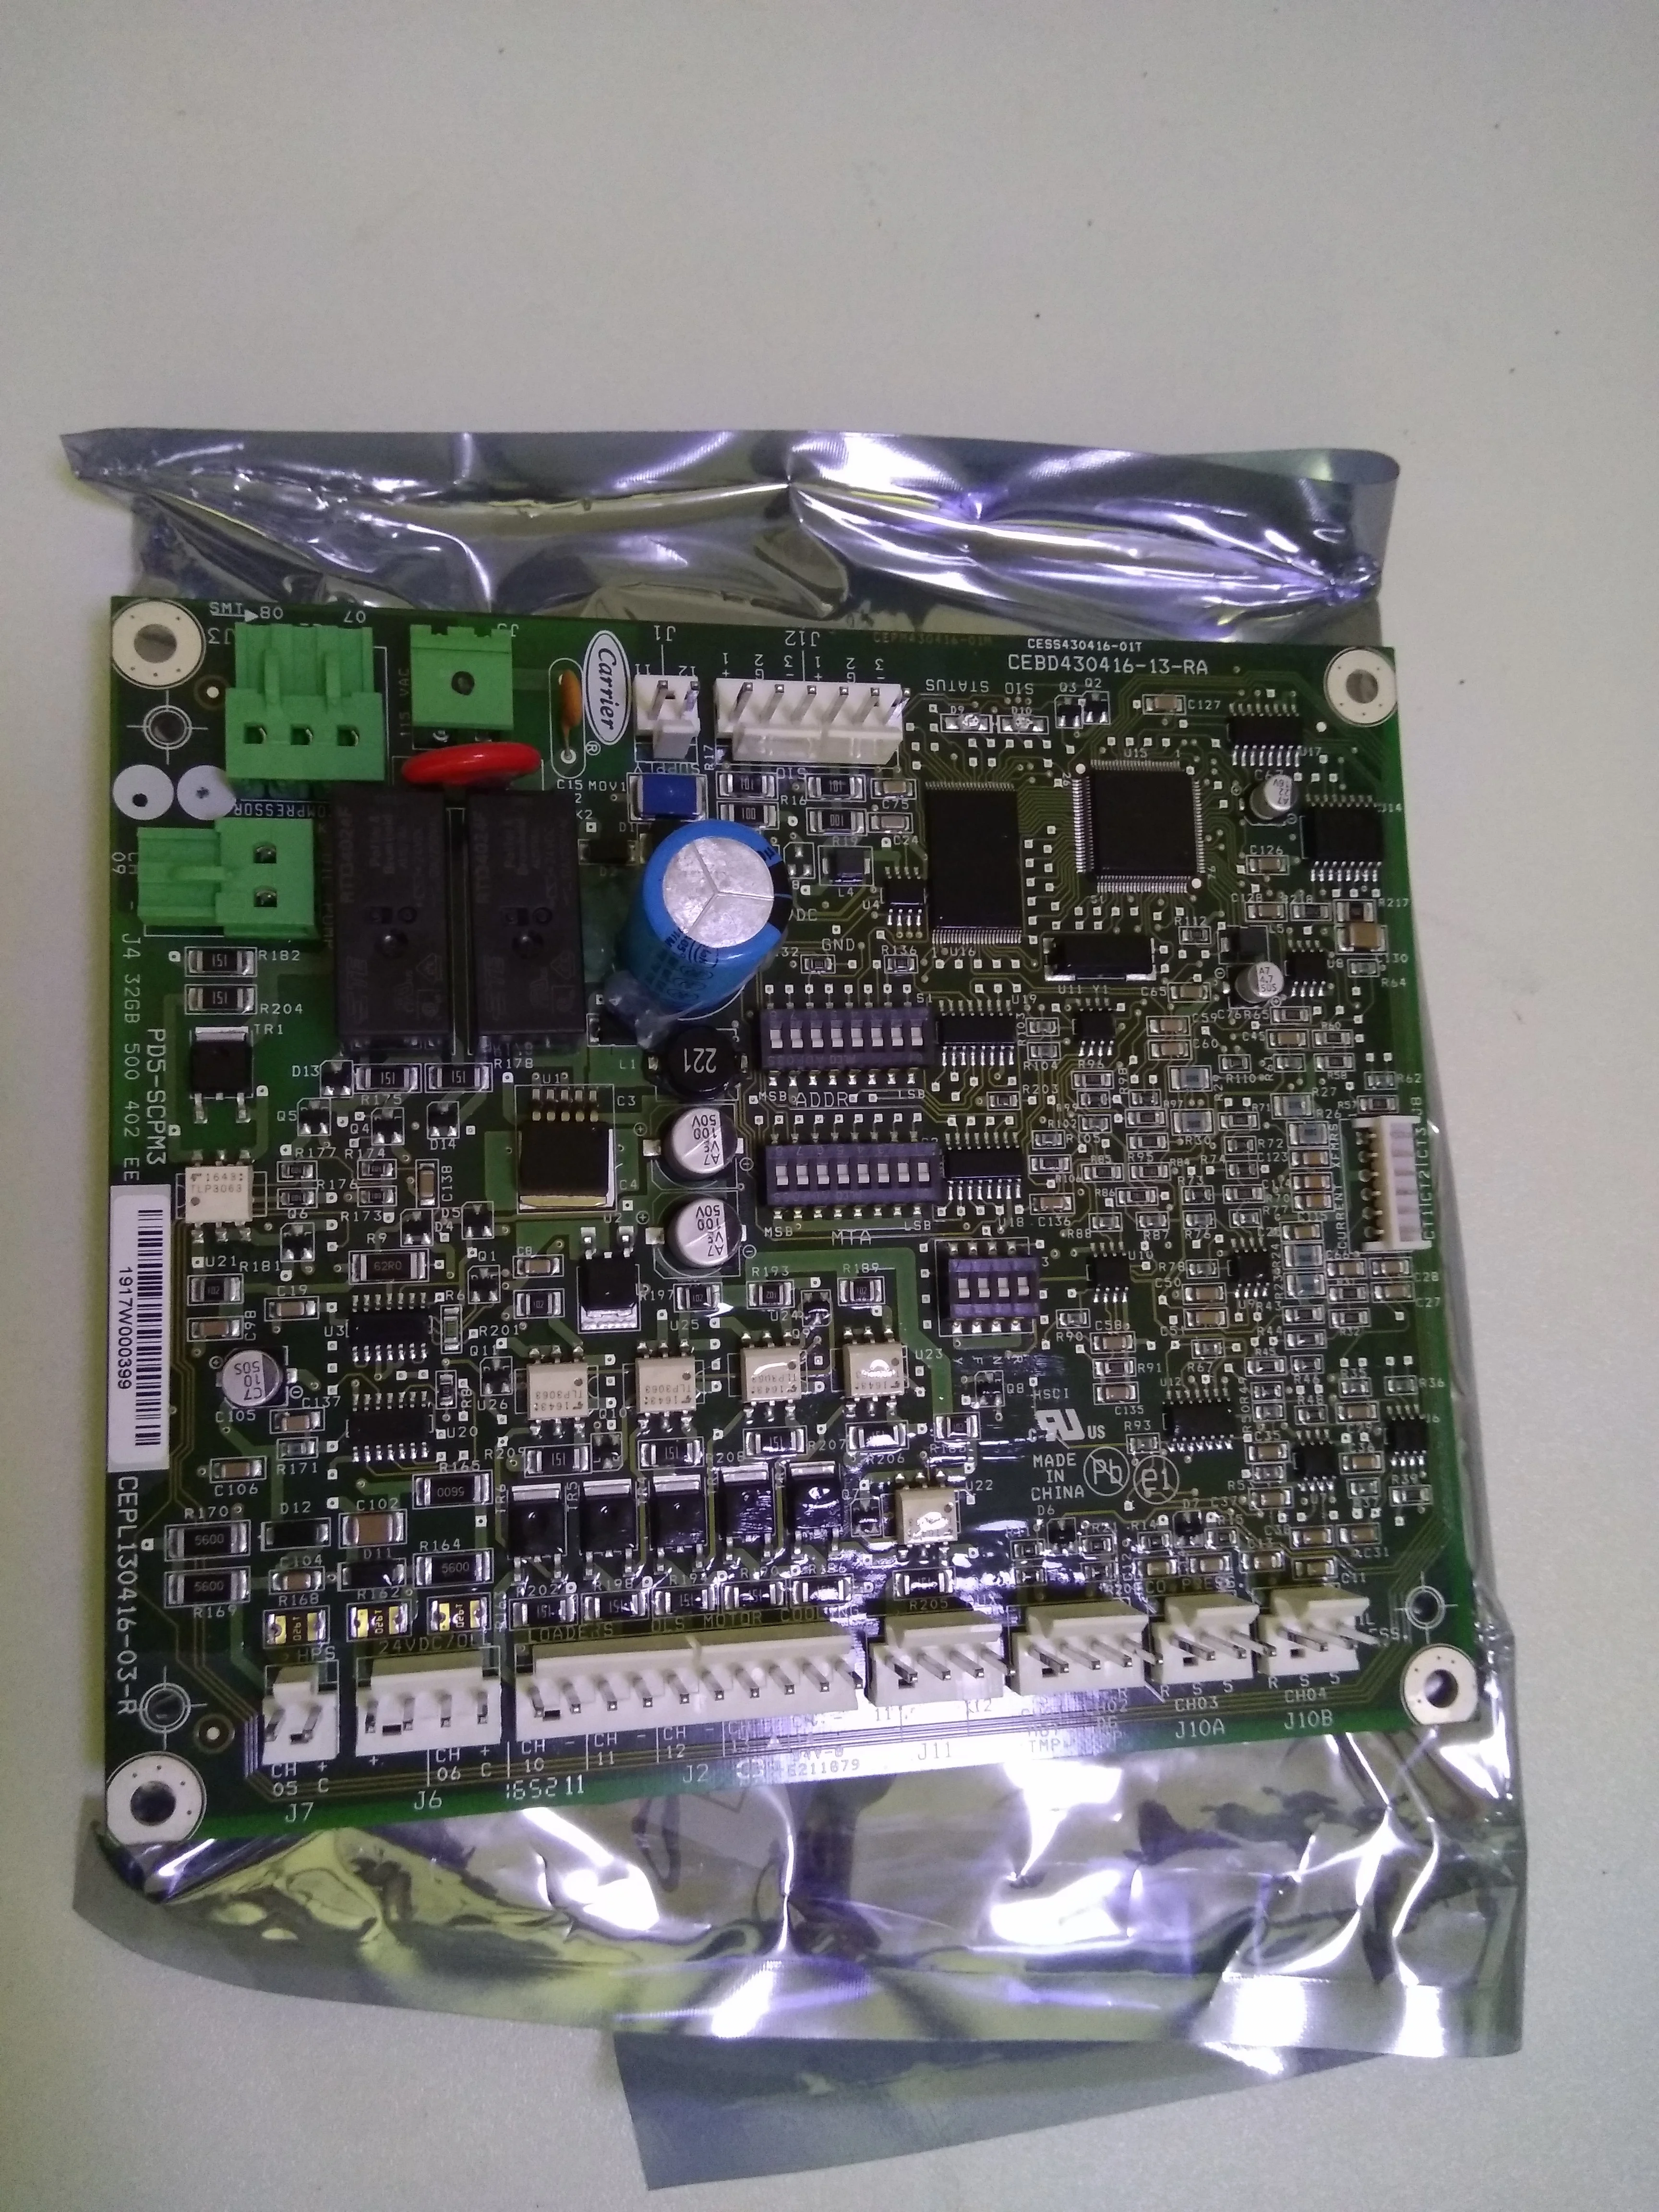 Carrier 32GB500402EE 32GB500402 SCPM board  Compressor card for Carrier 30HXC chiller units